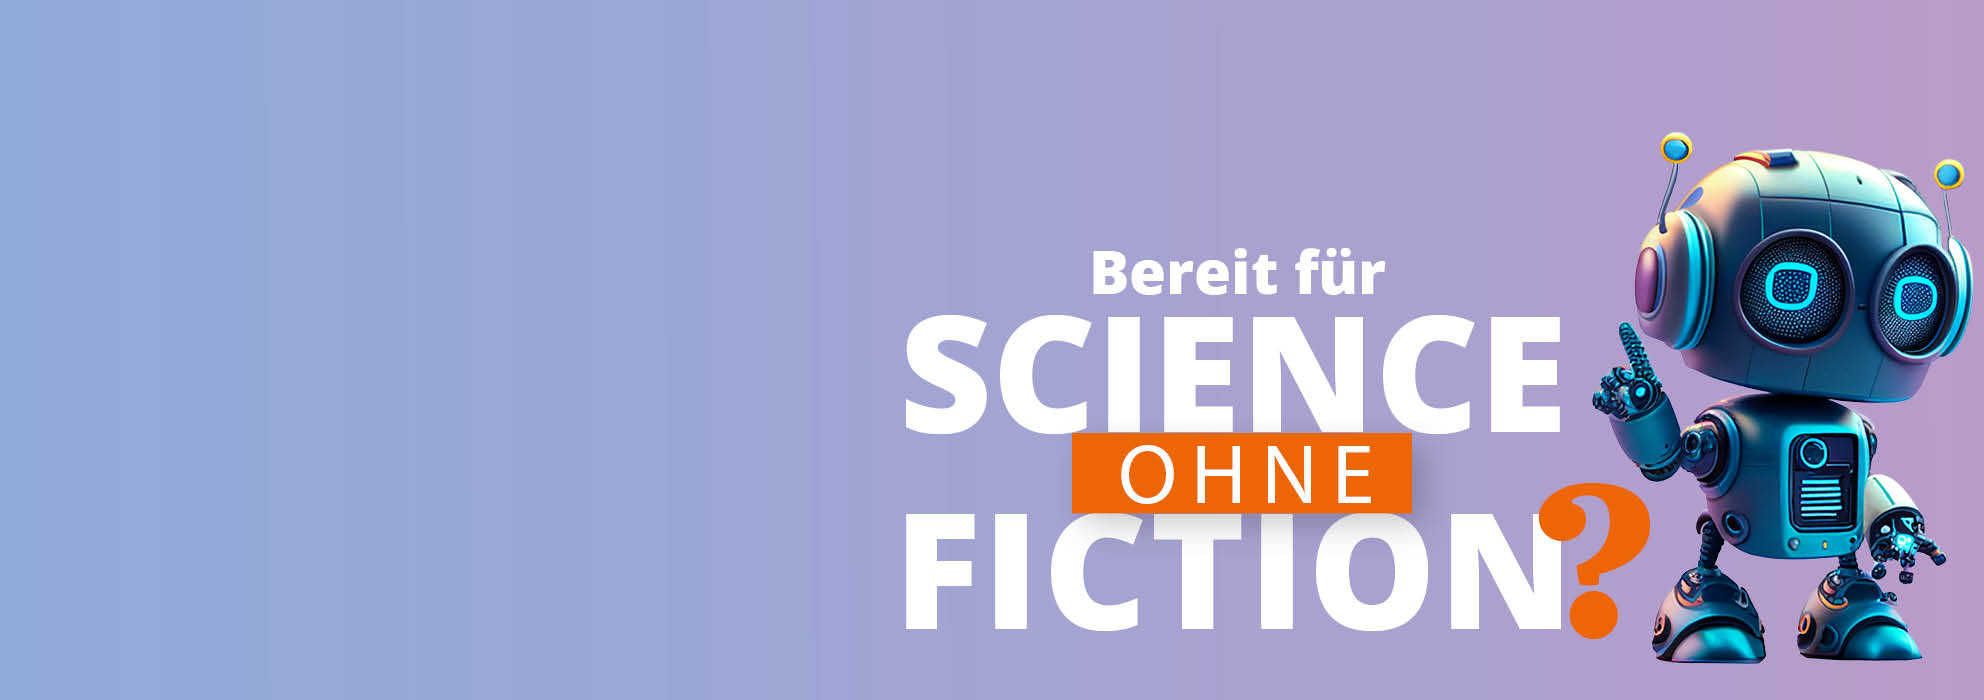 Header Science ohne Fiction